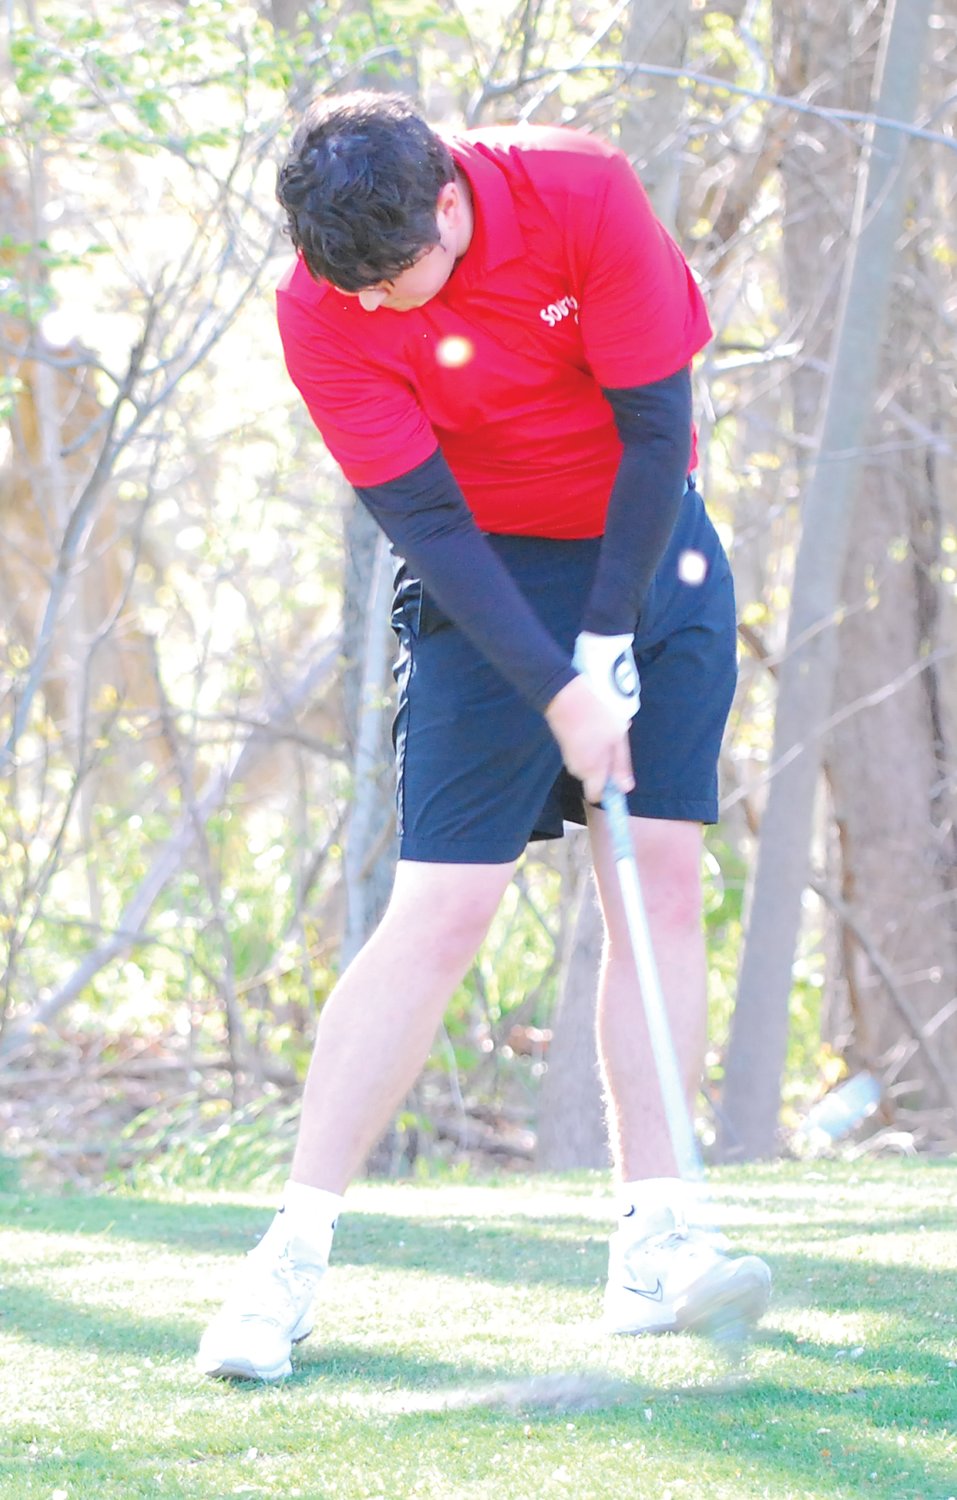 Southmont's Nolan Allen battled the wind and shot a 46 on Monday night at the Crawfordsville Country Club.